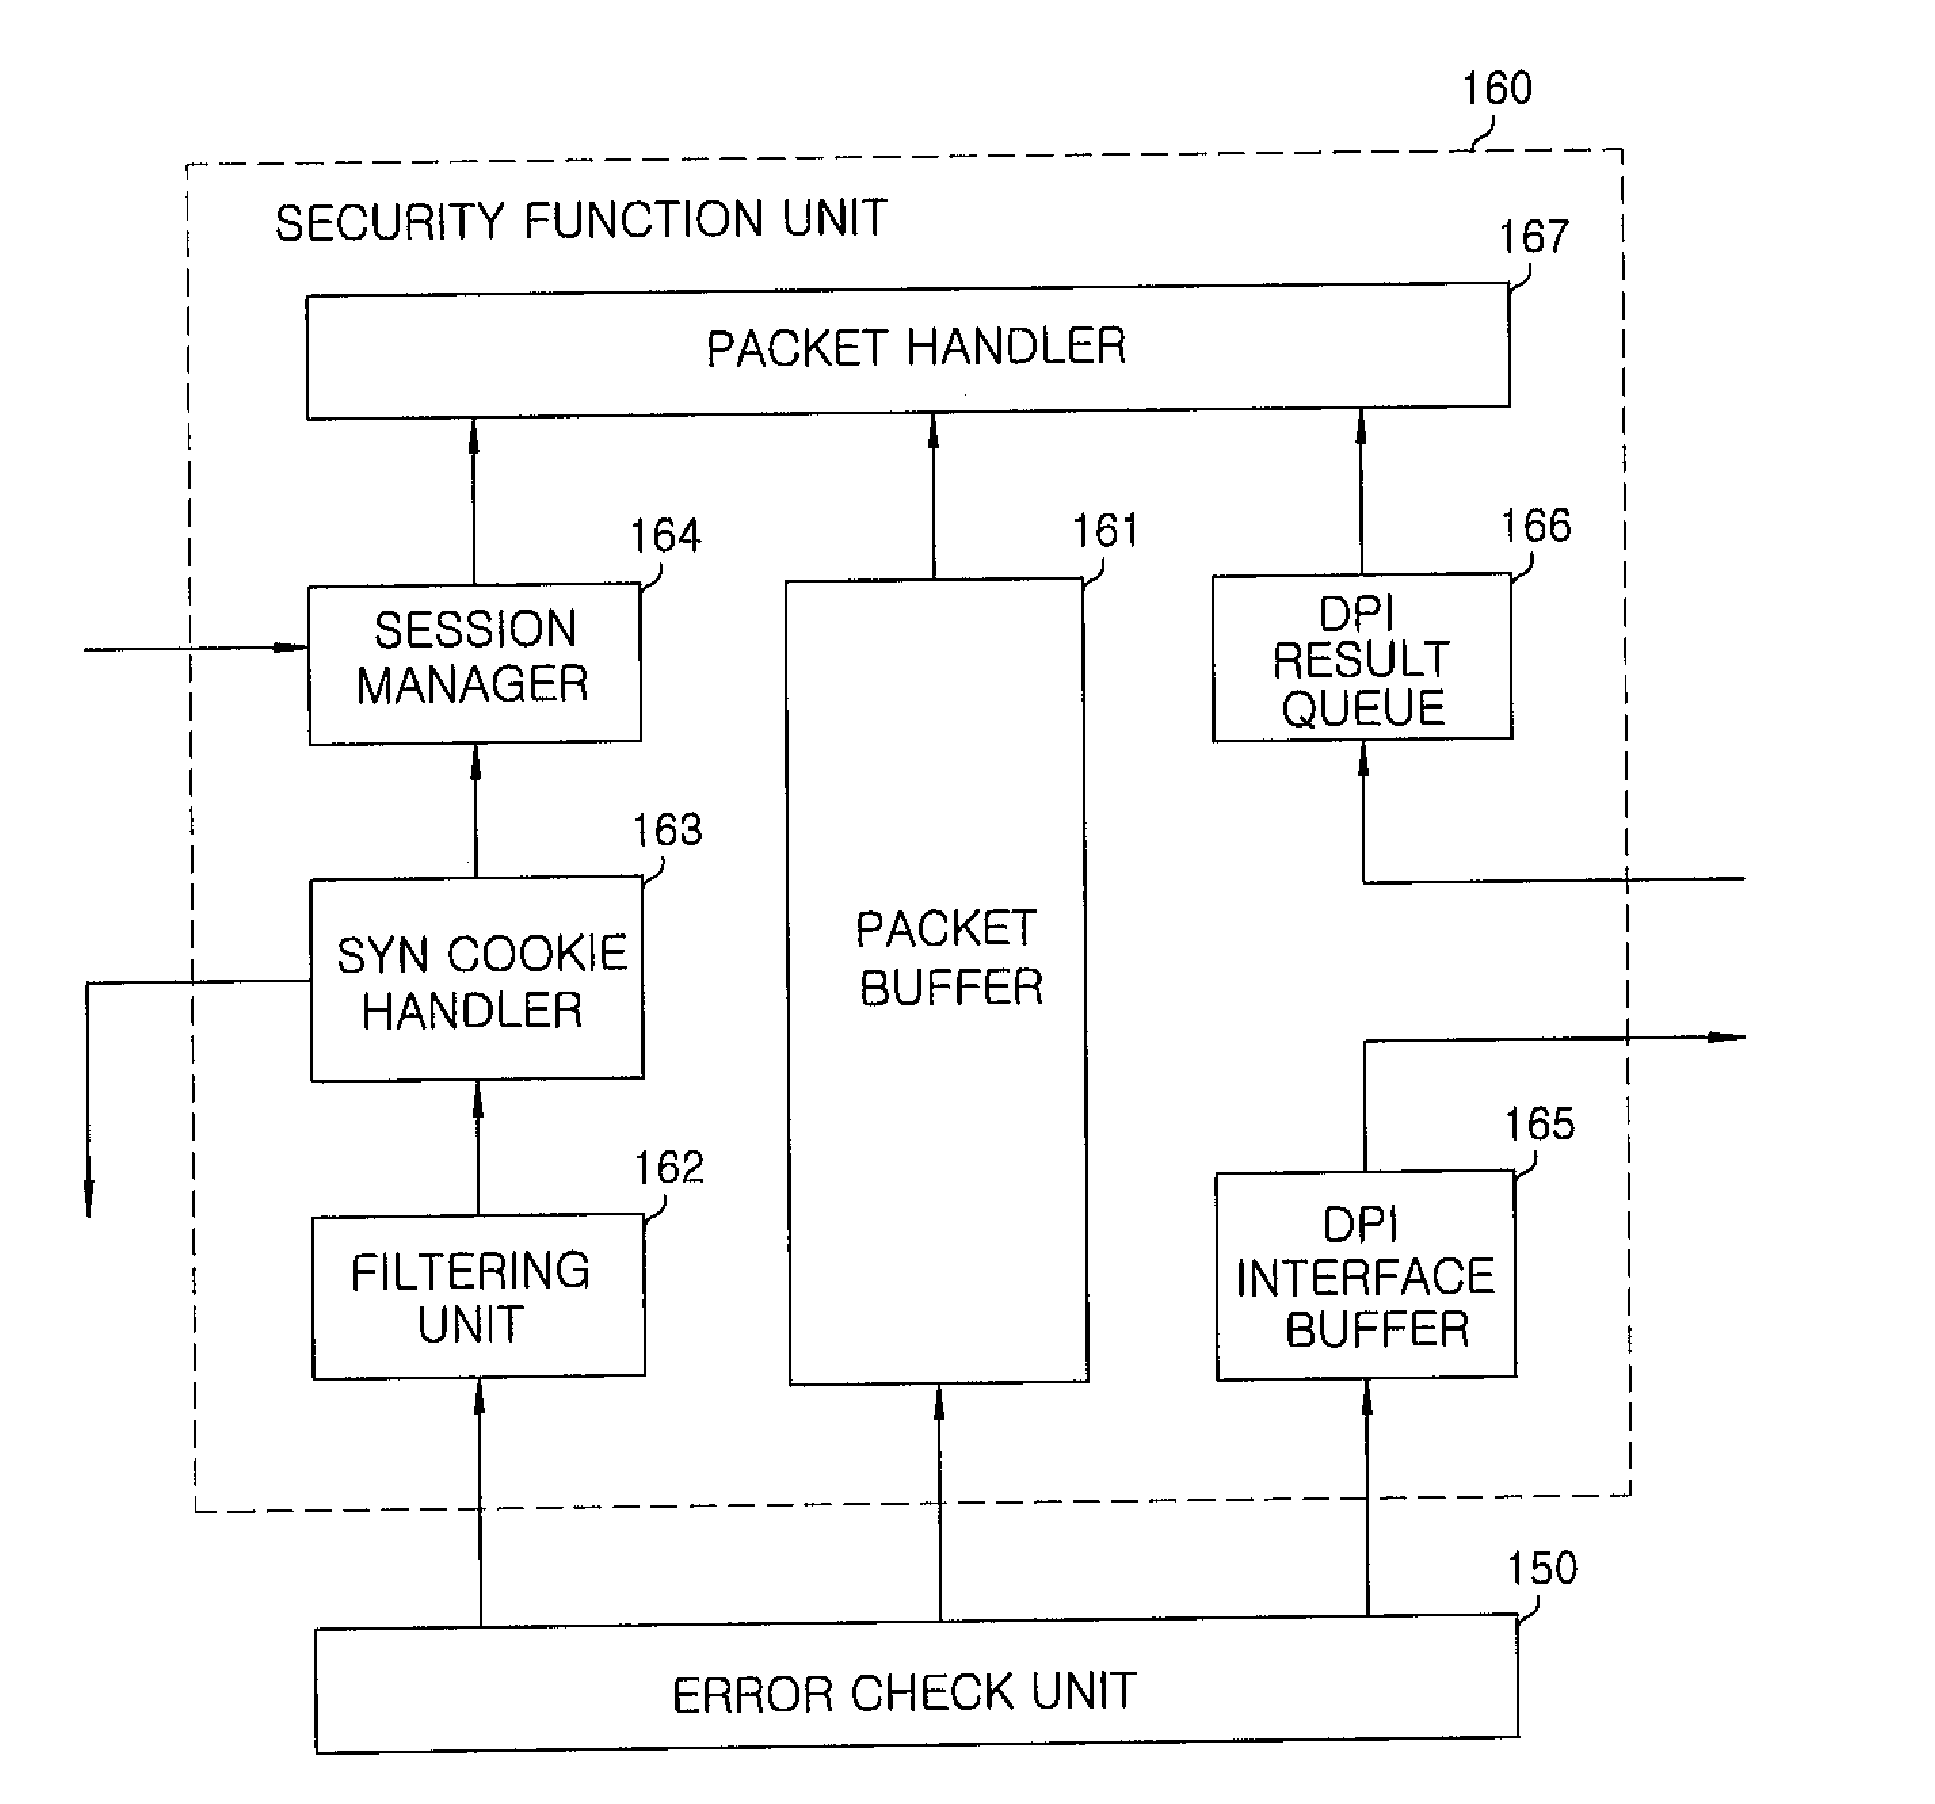 Apparatus and method for preventing network attacks, and packet transmission and reception processing apparatus and method using the same